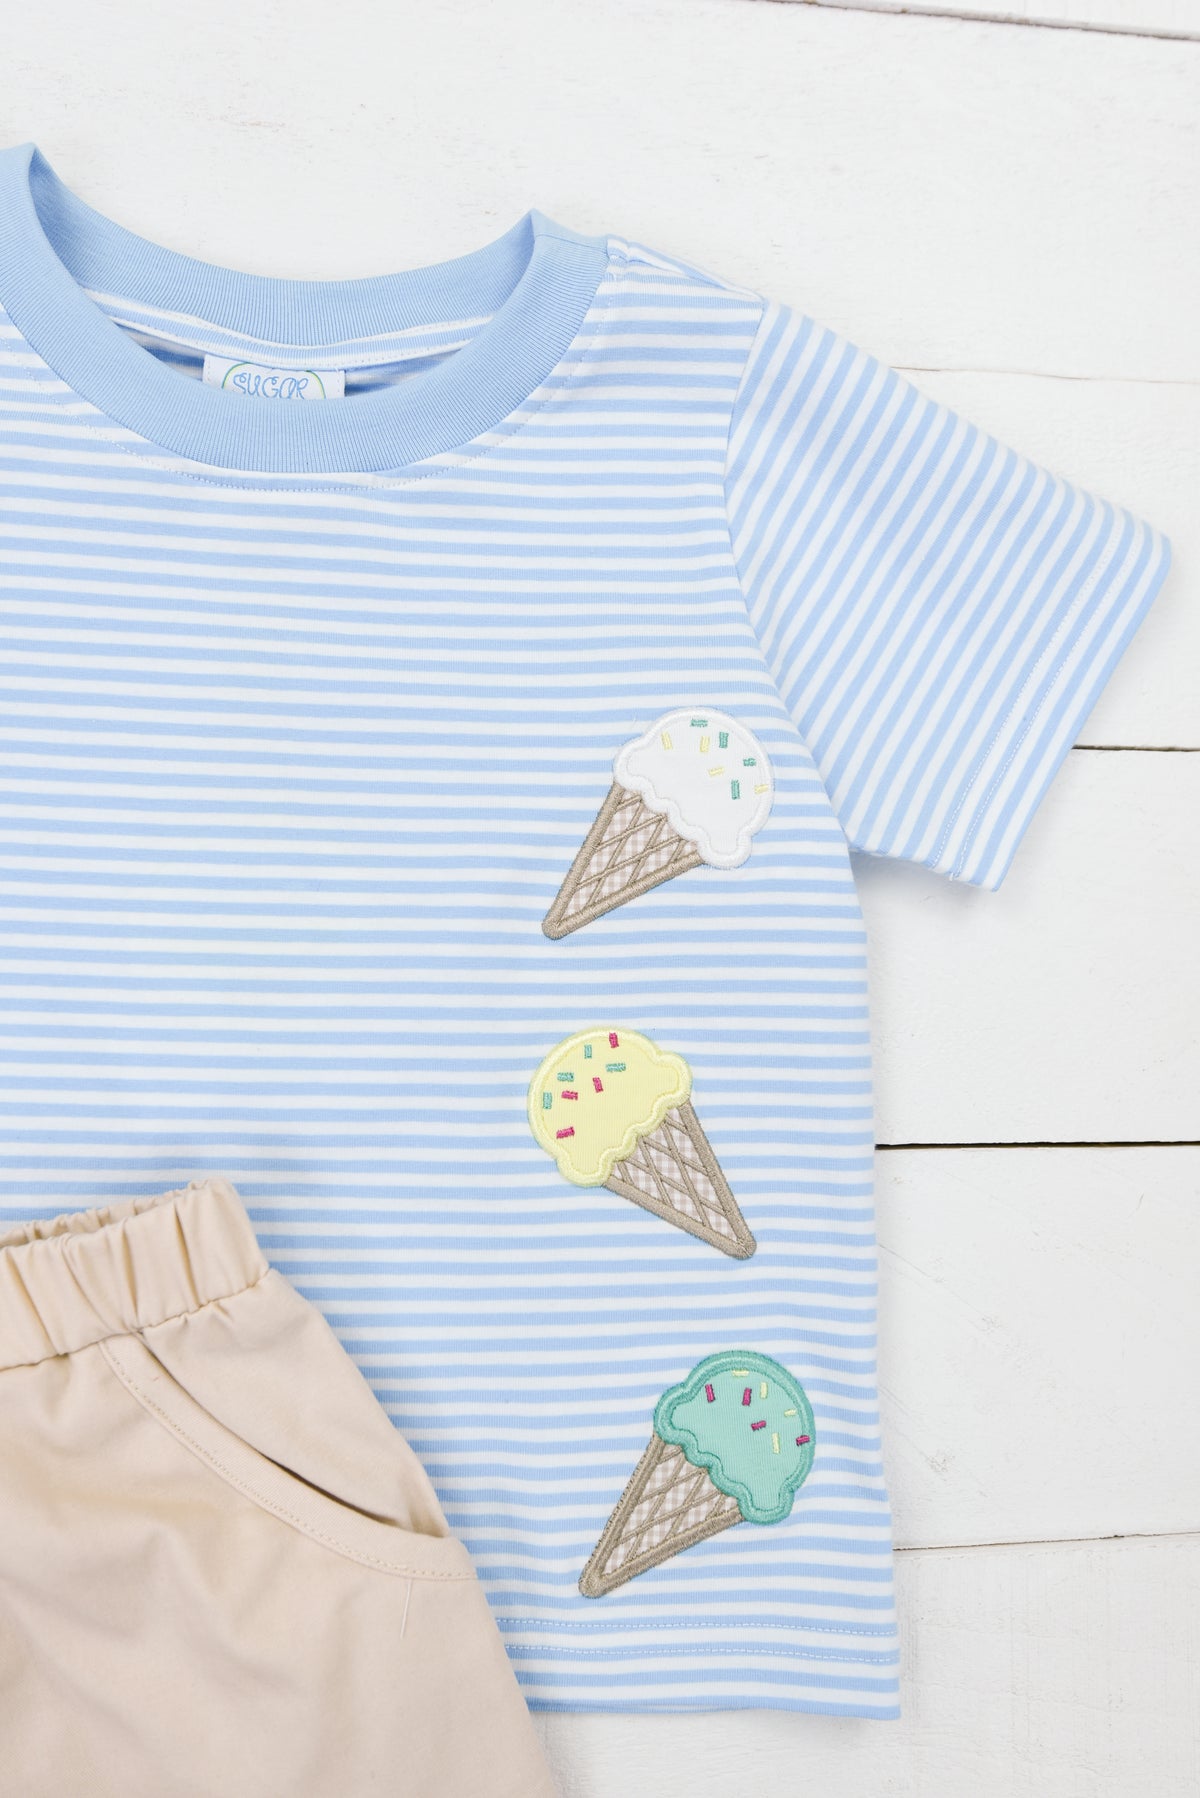 a blue and white striped shirt with ice cream on it